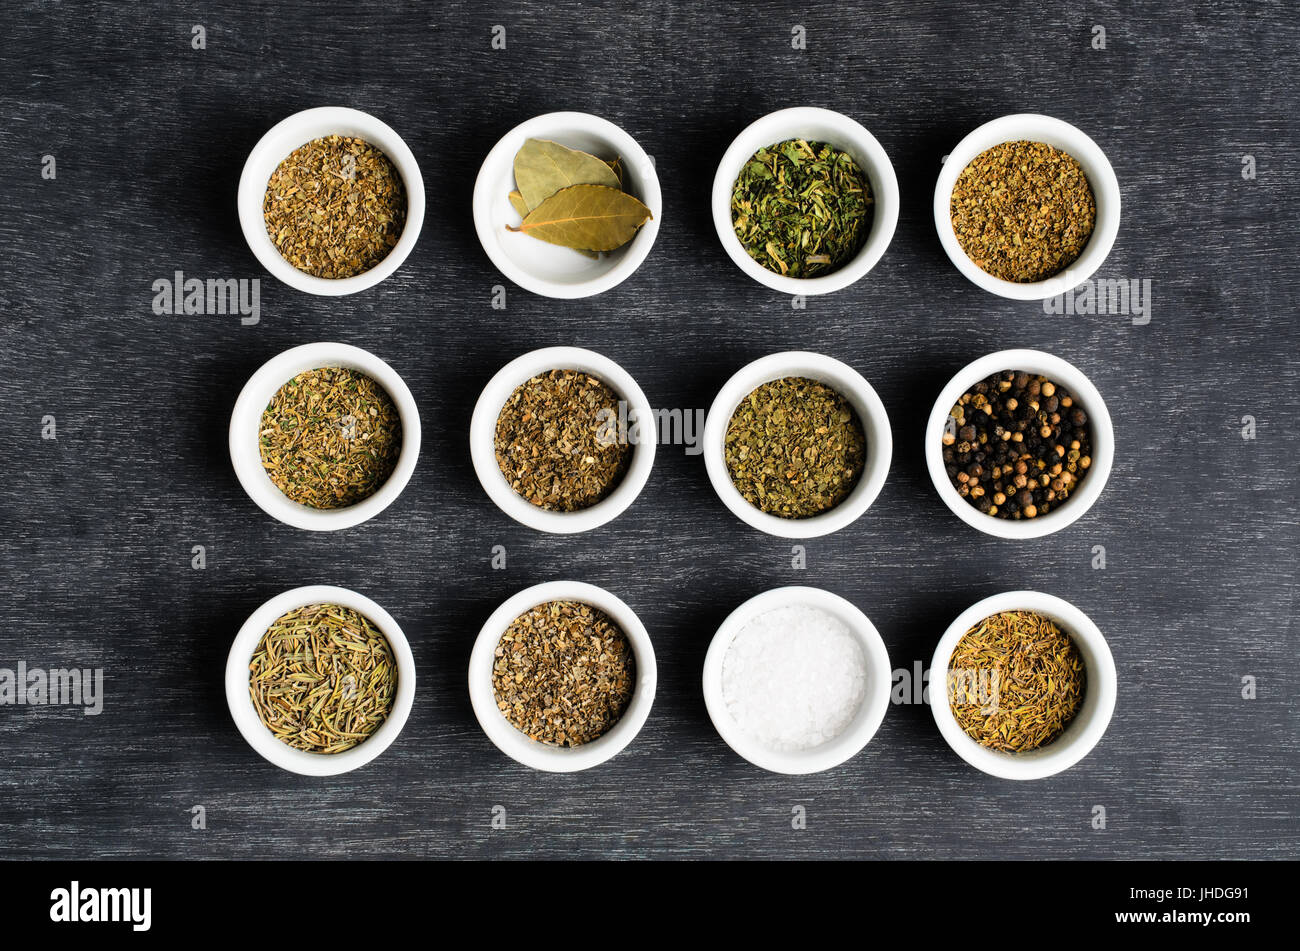 Overhead shot of rows of dried herbs, salt and peppercorns in small bowls on a dusty, textured chalkboard surface. Stock Photo